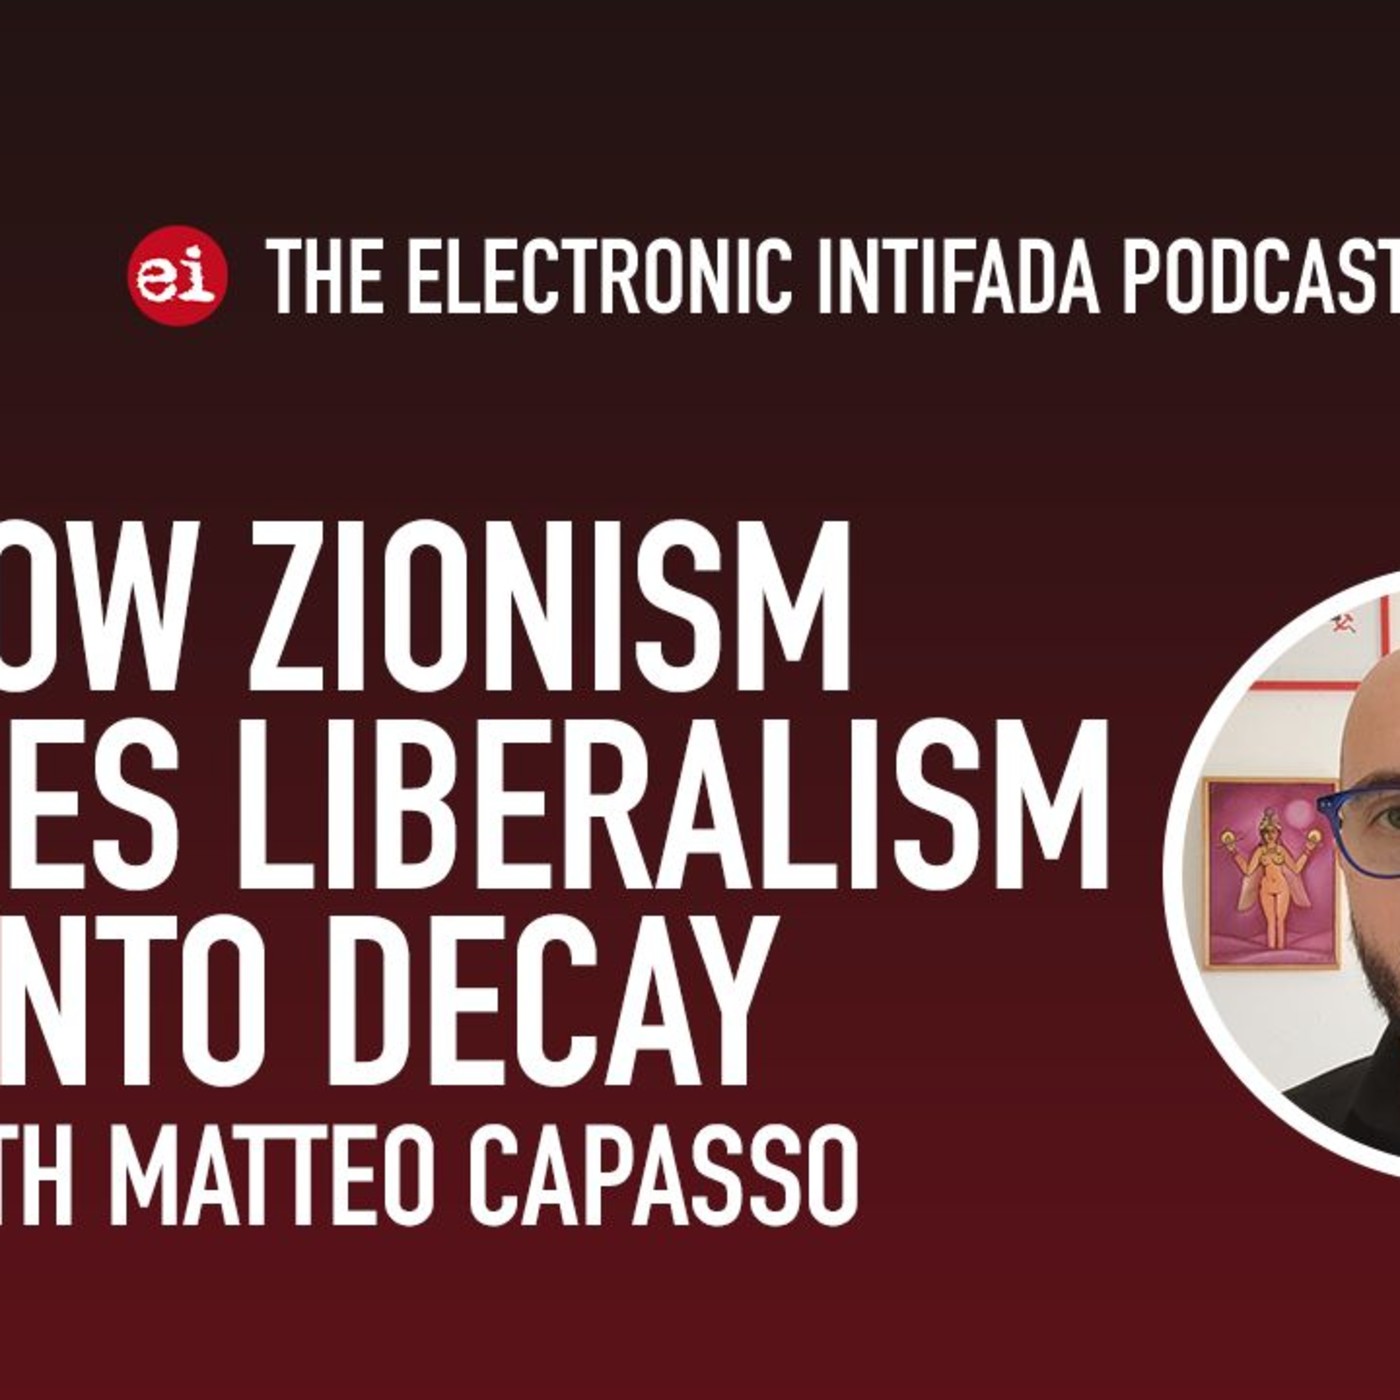 How Zionism pushes liberalism into decay, with Matteo Capasso